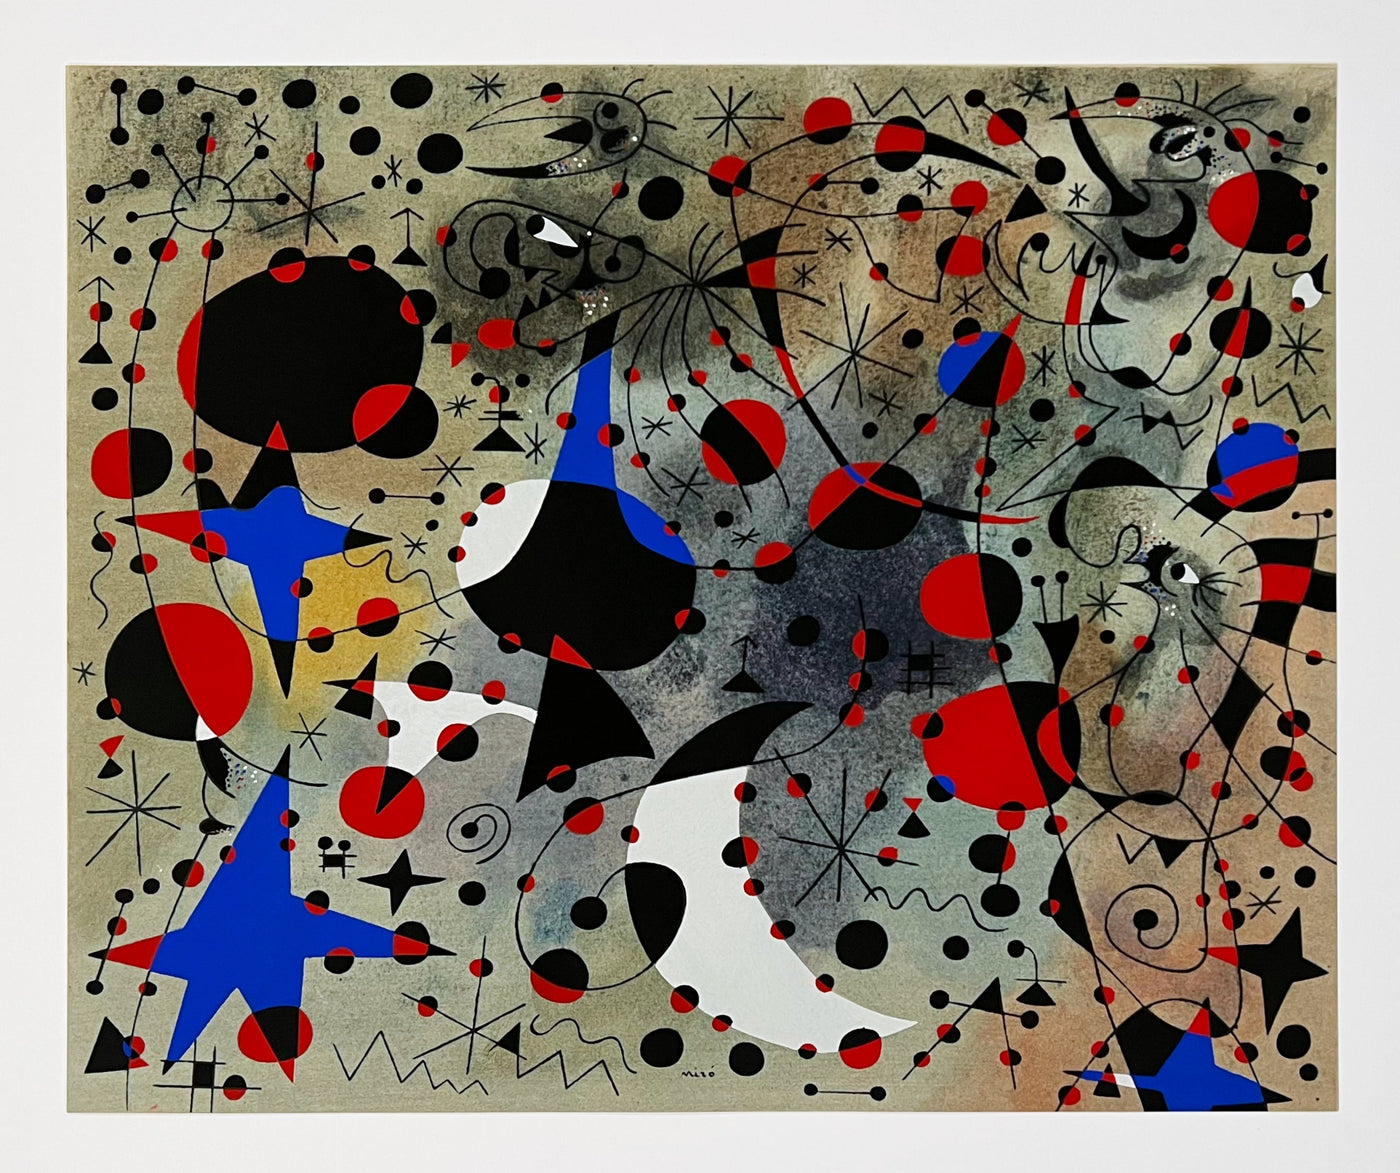 Joan Miro (after) Le chant du rossignol a minuit et la pluie matinale (The Nightingale's Song at Midnight and the Morning Rain), Plate XI (Cramer No. 58) 1959